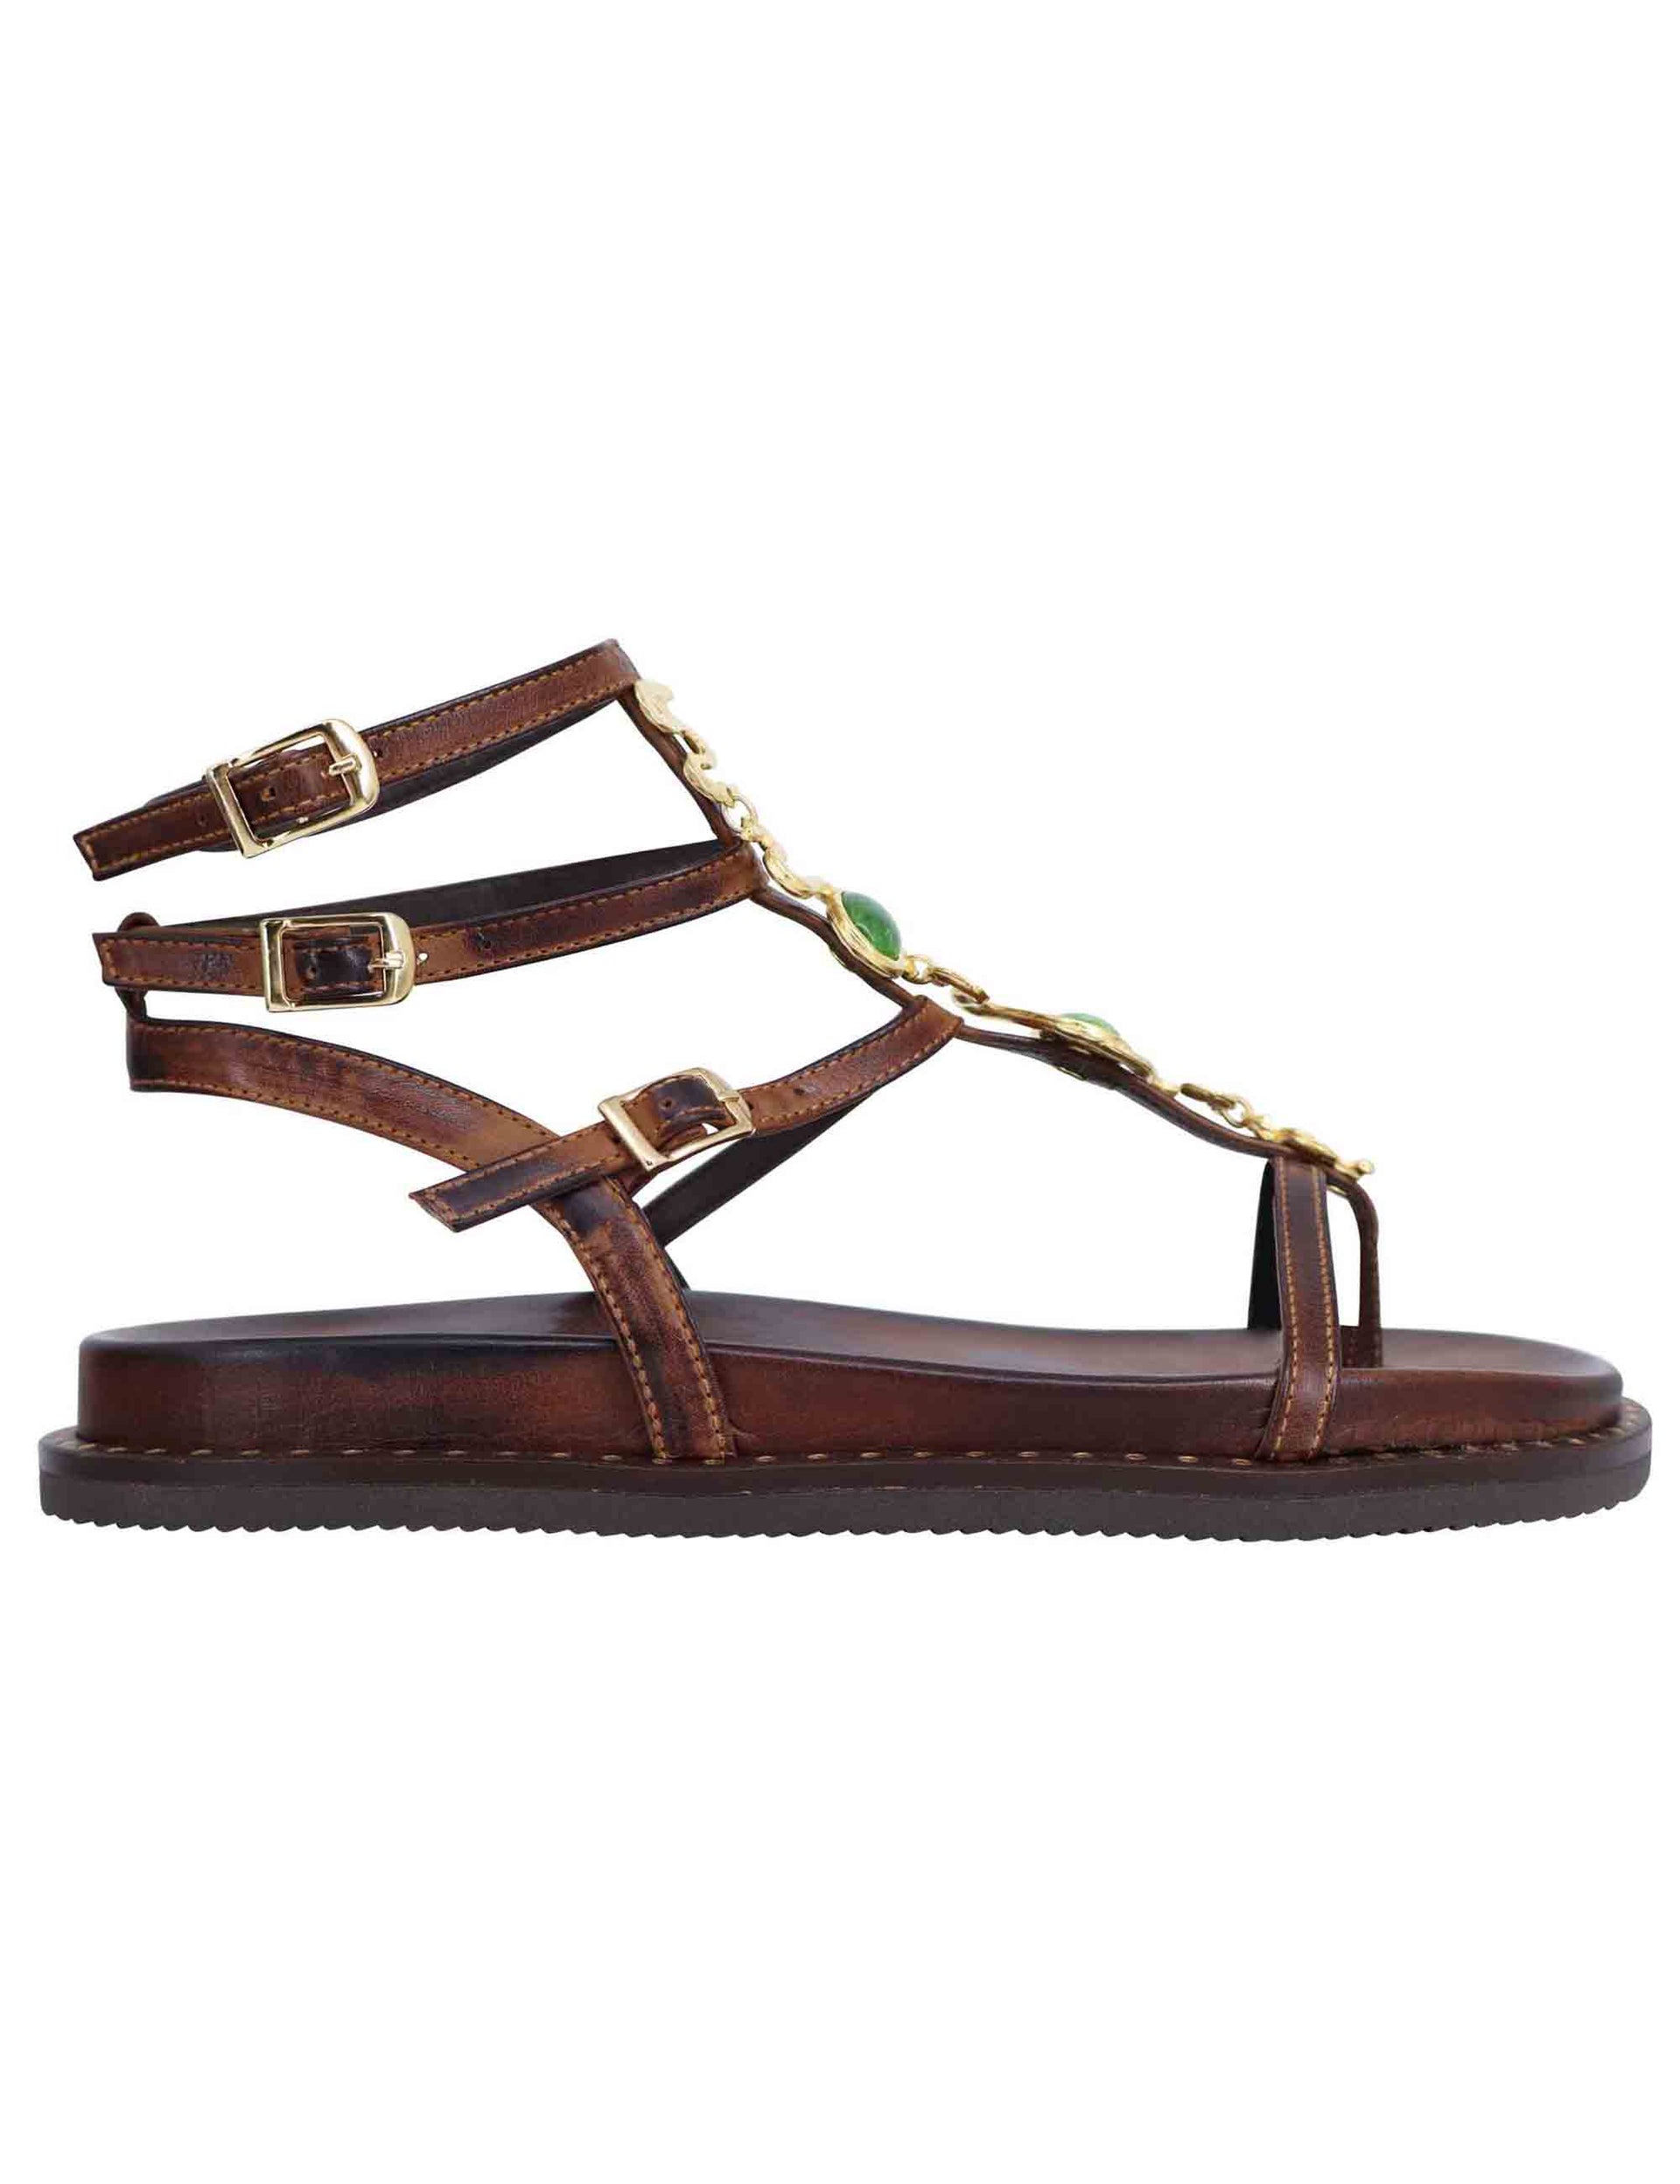 Women's flat flip-flop sandals in brown leather with studs and ankle straps